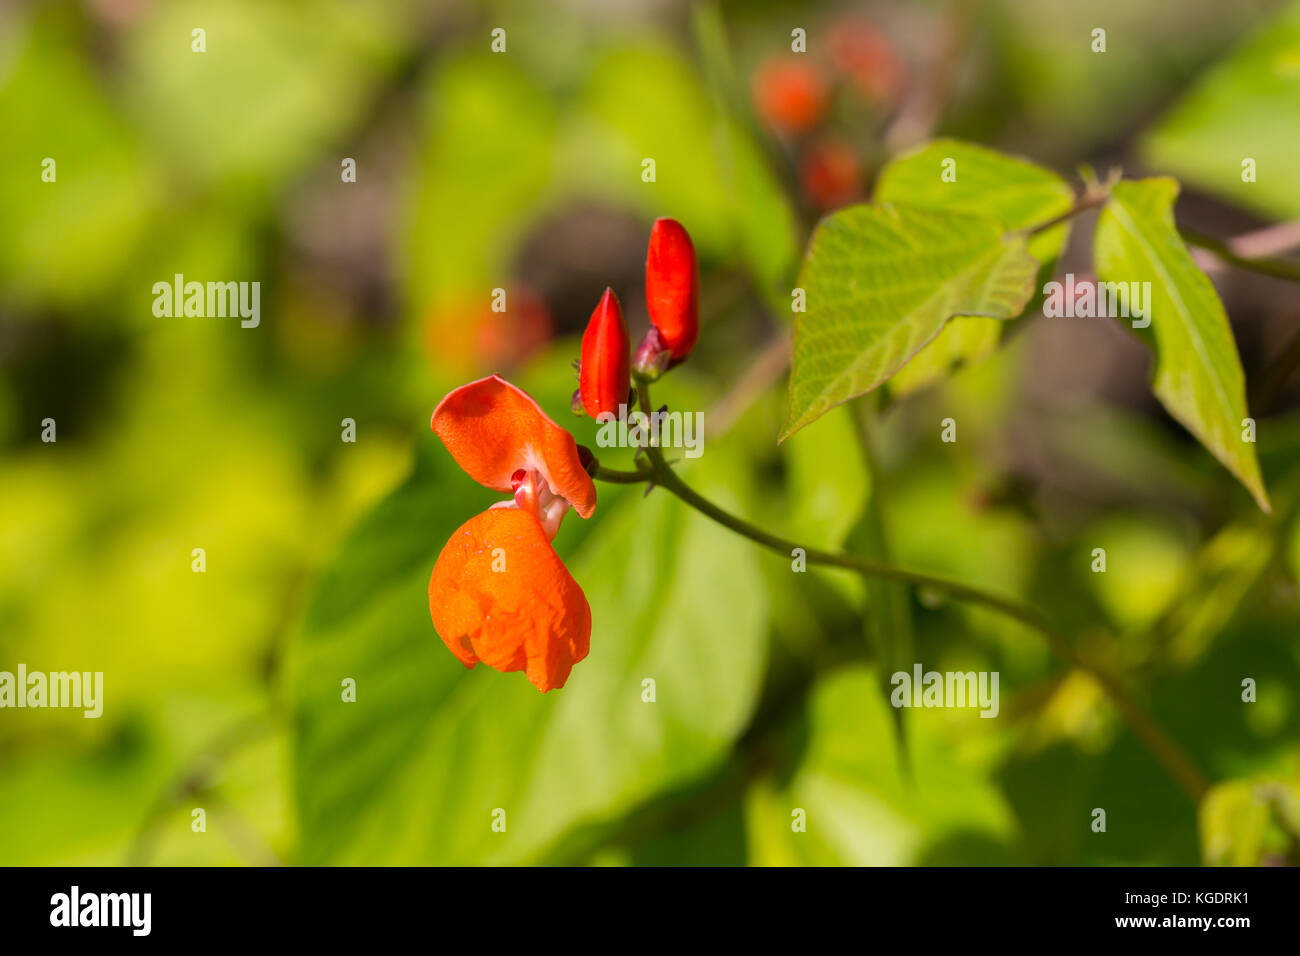 red blossom of scarlet runner (Phaseolus coccineus) in green environment Stock Photo